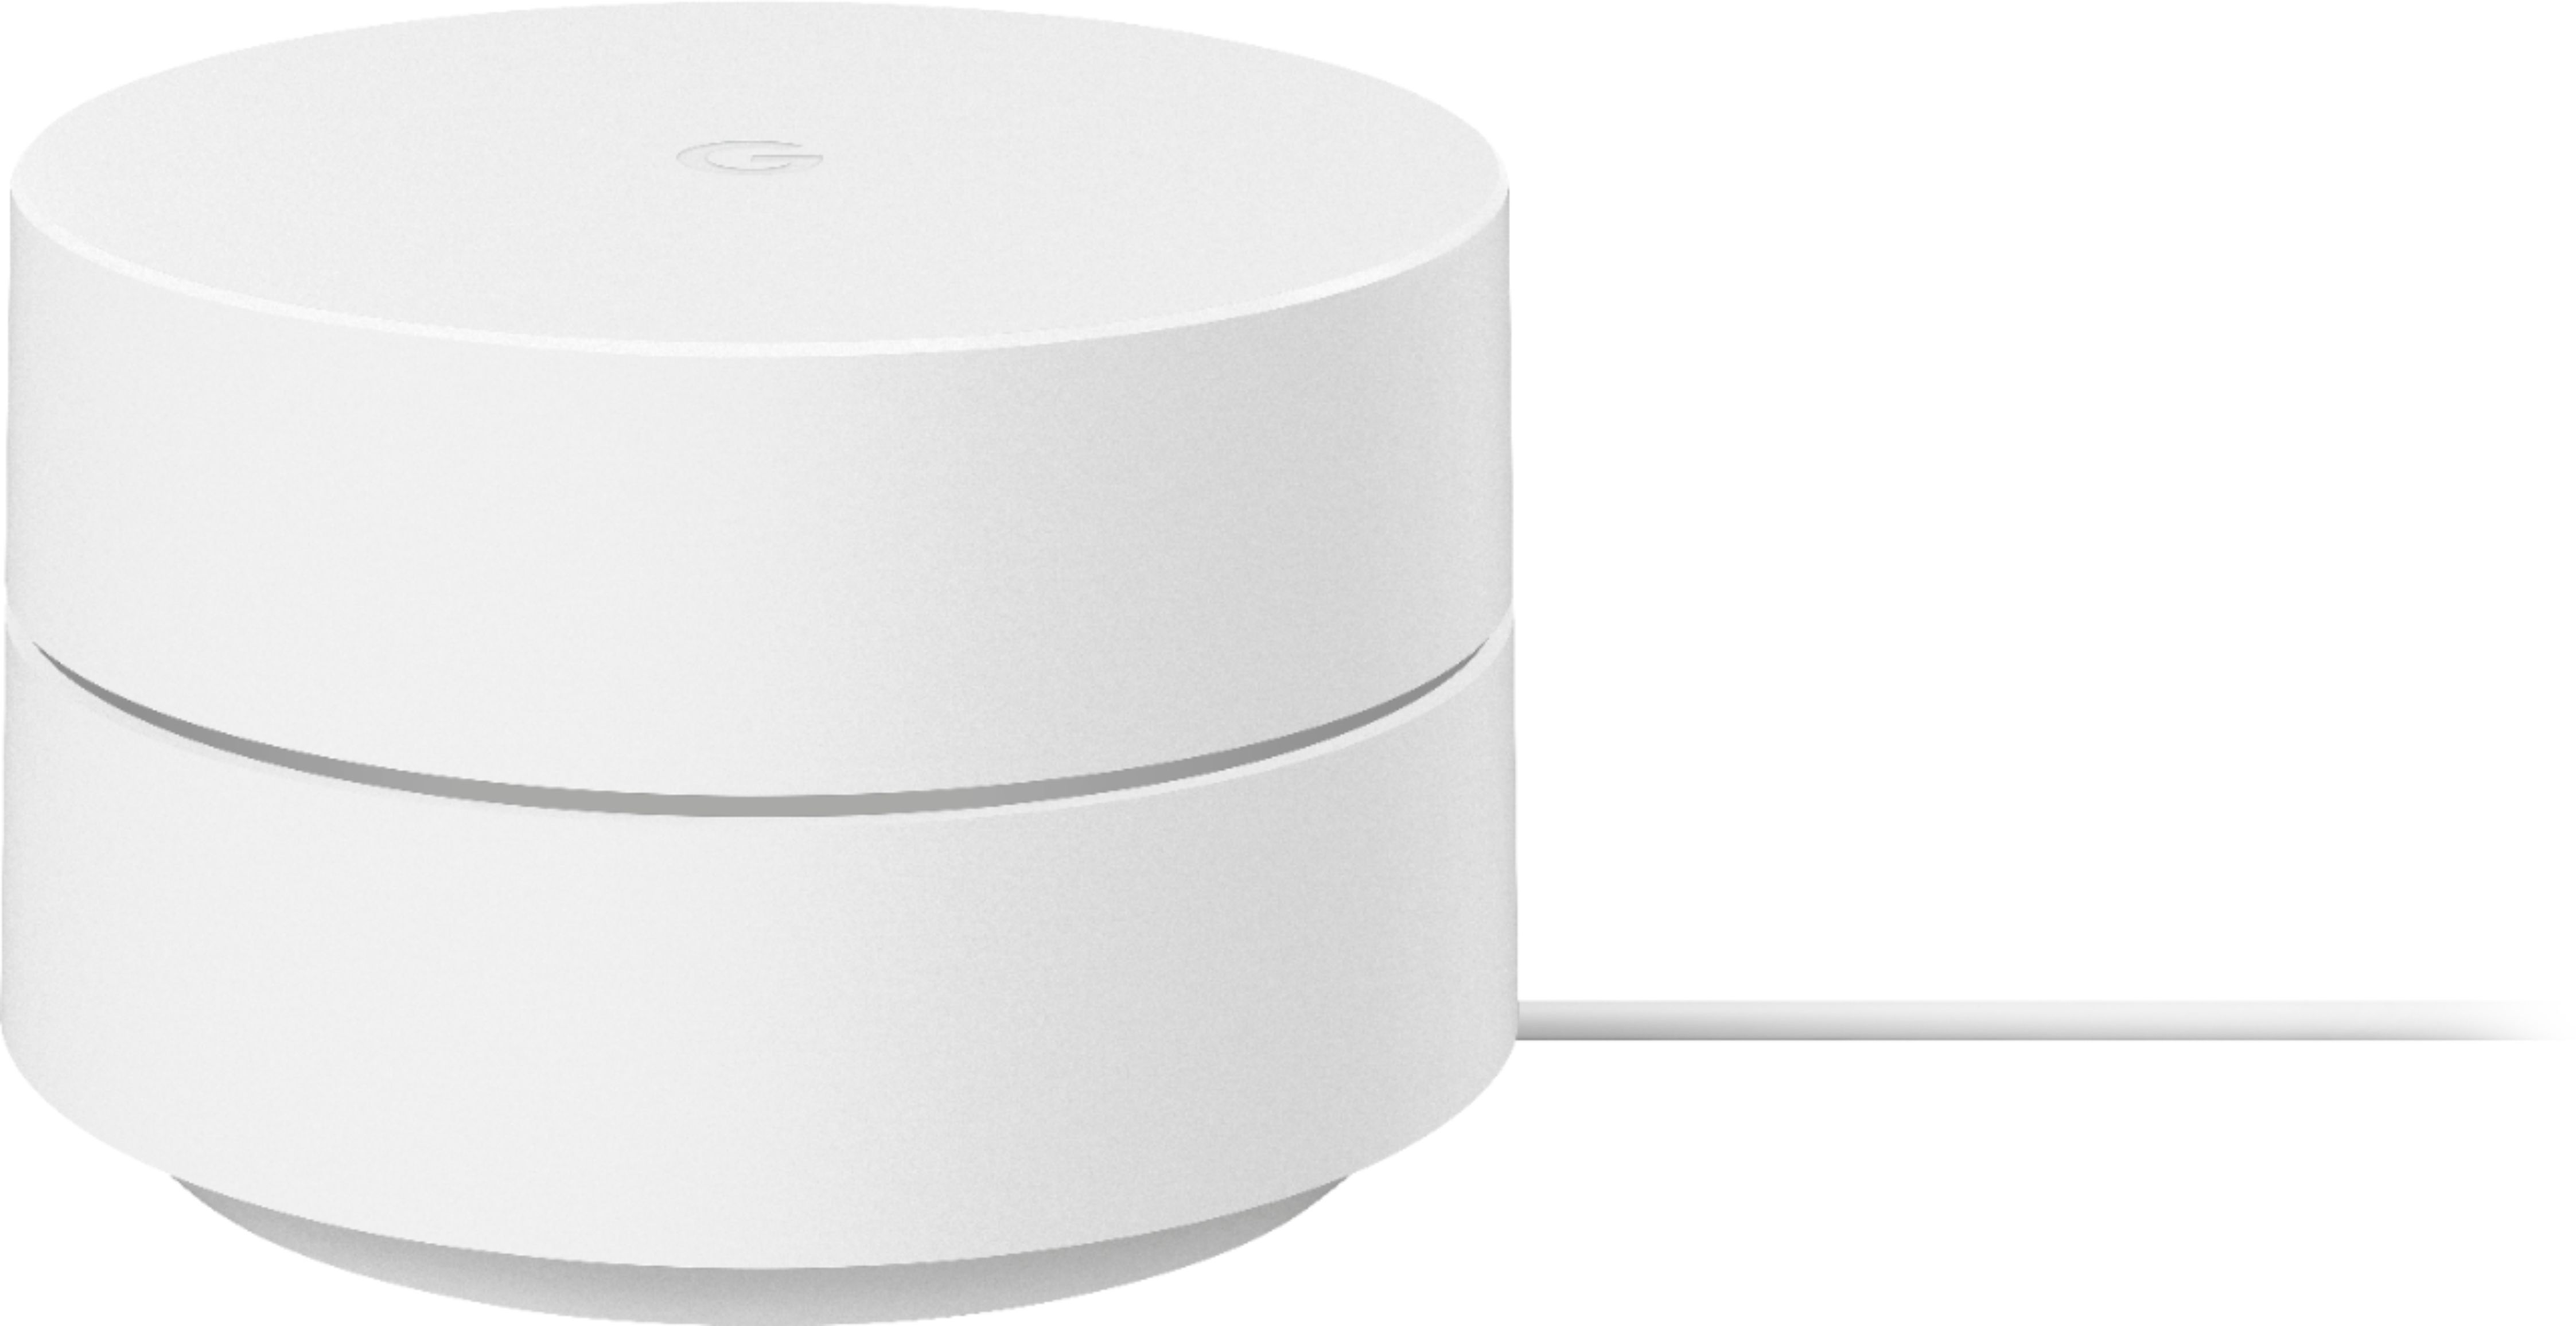 Angle View: Google - Geek Squad Certified Refurbished AC1200 Dual-Band Mesh Wi-Fi Router - White